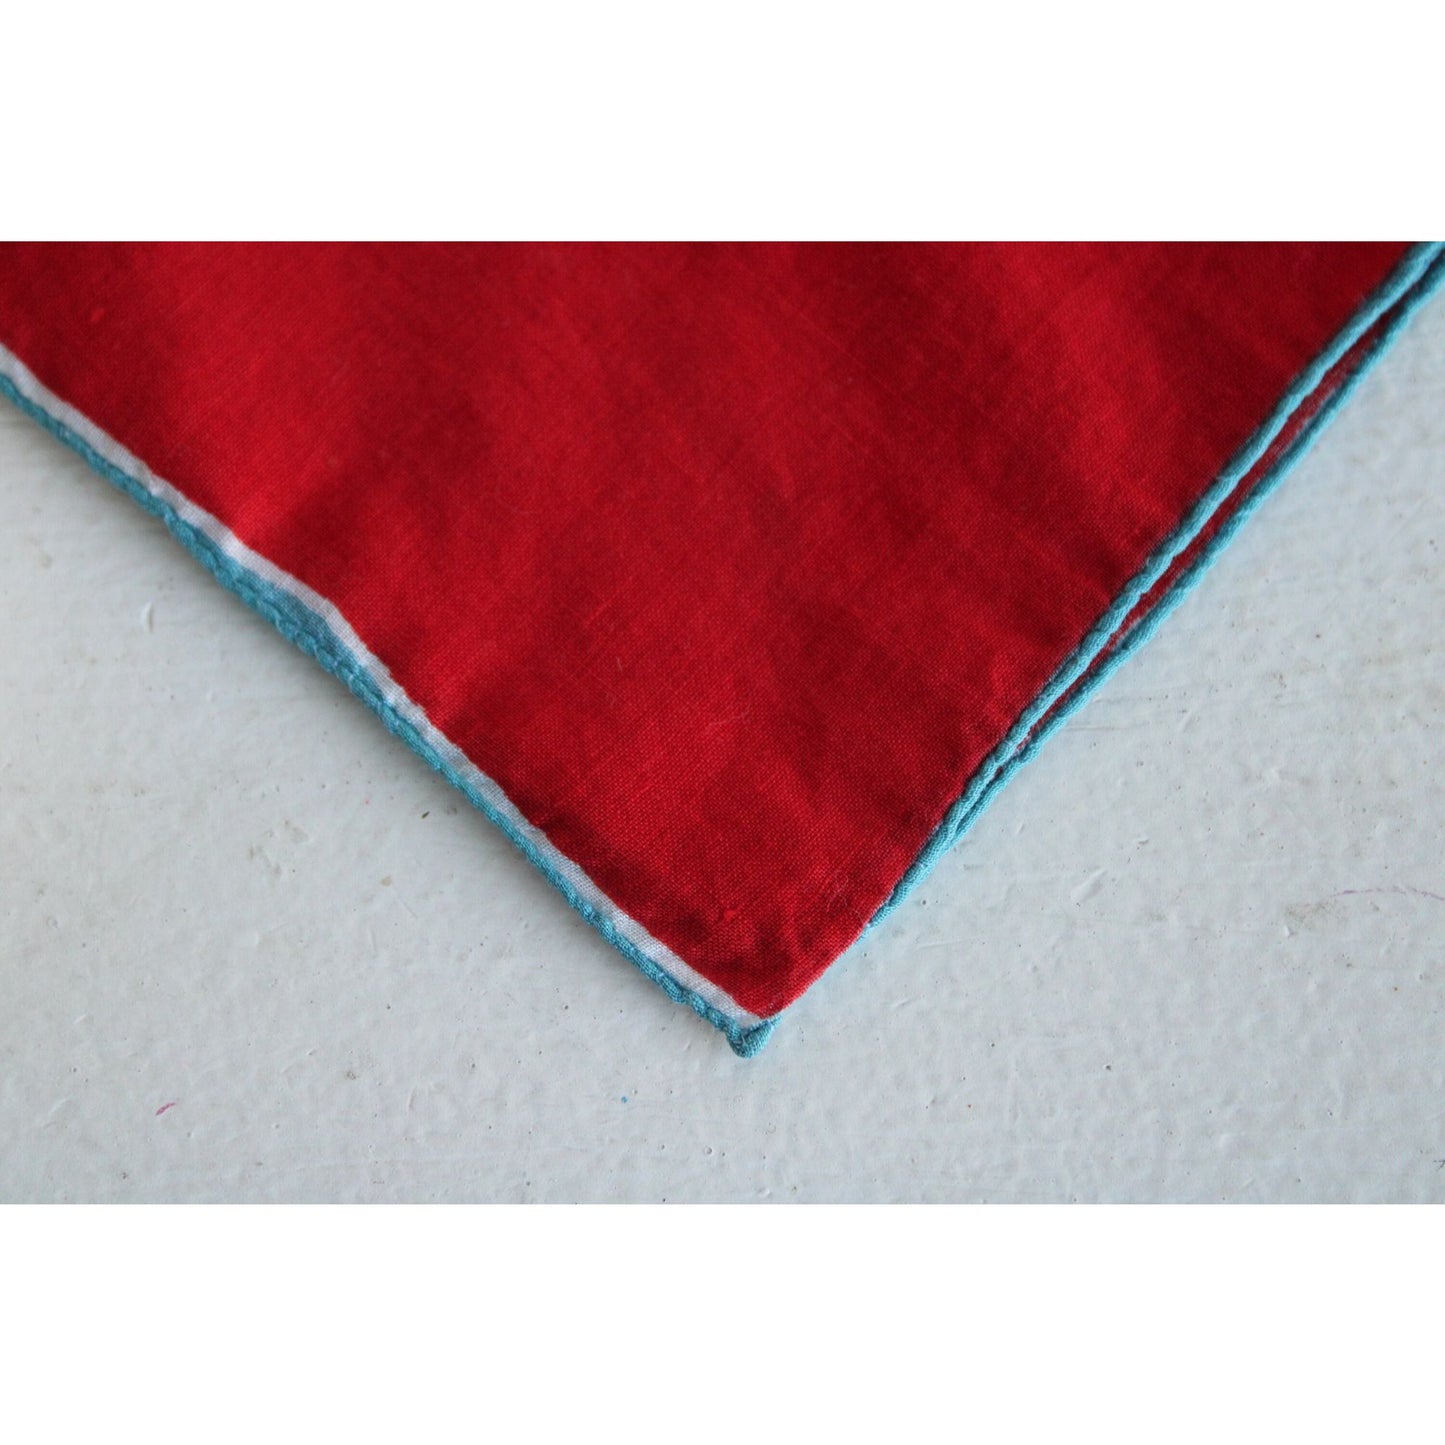 Vintage Red Handkerchief with Blue Edge